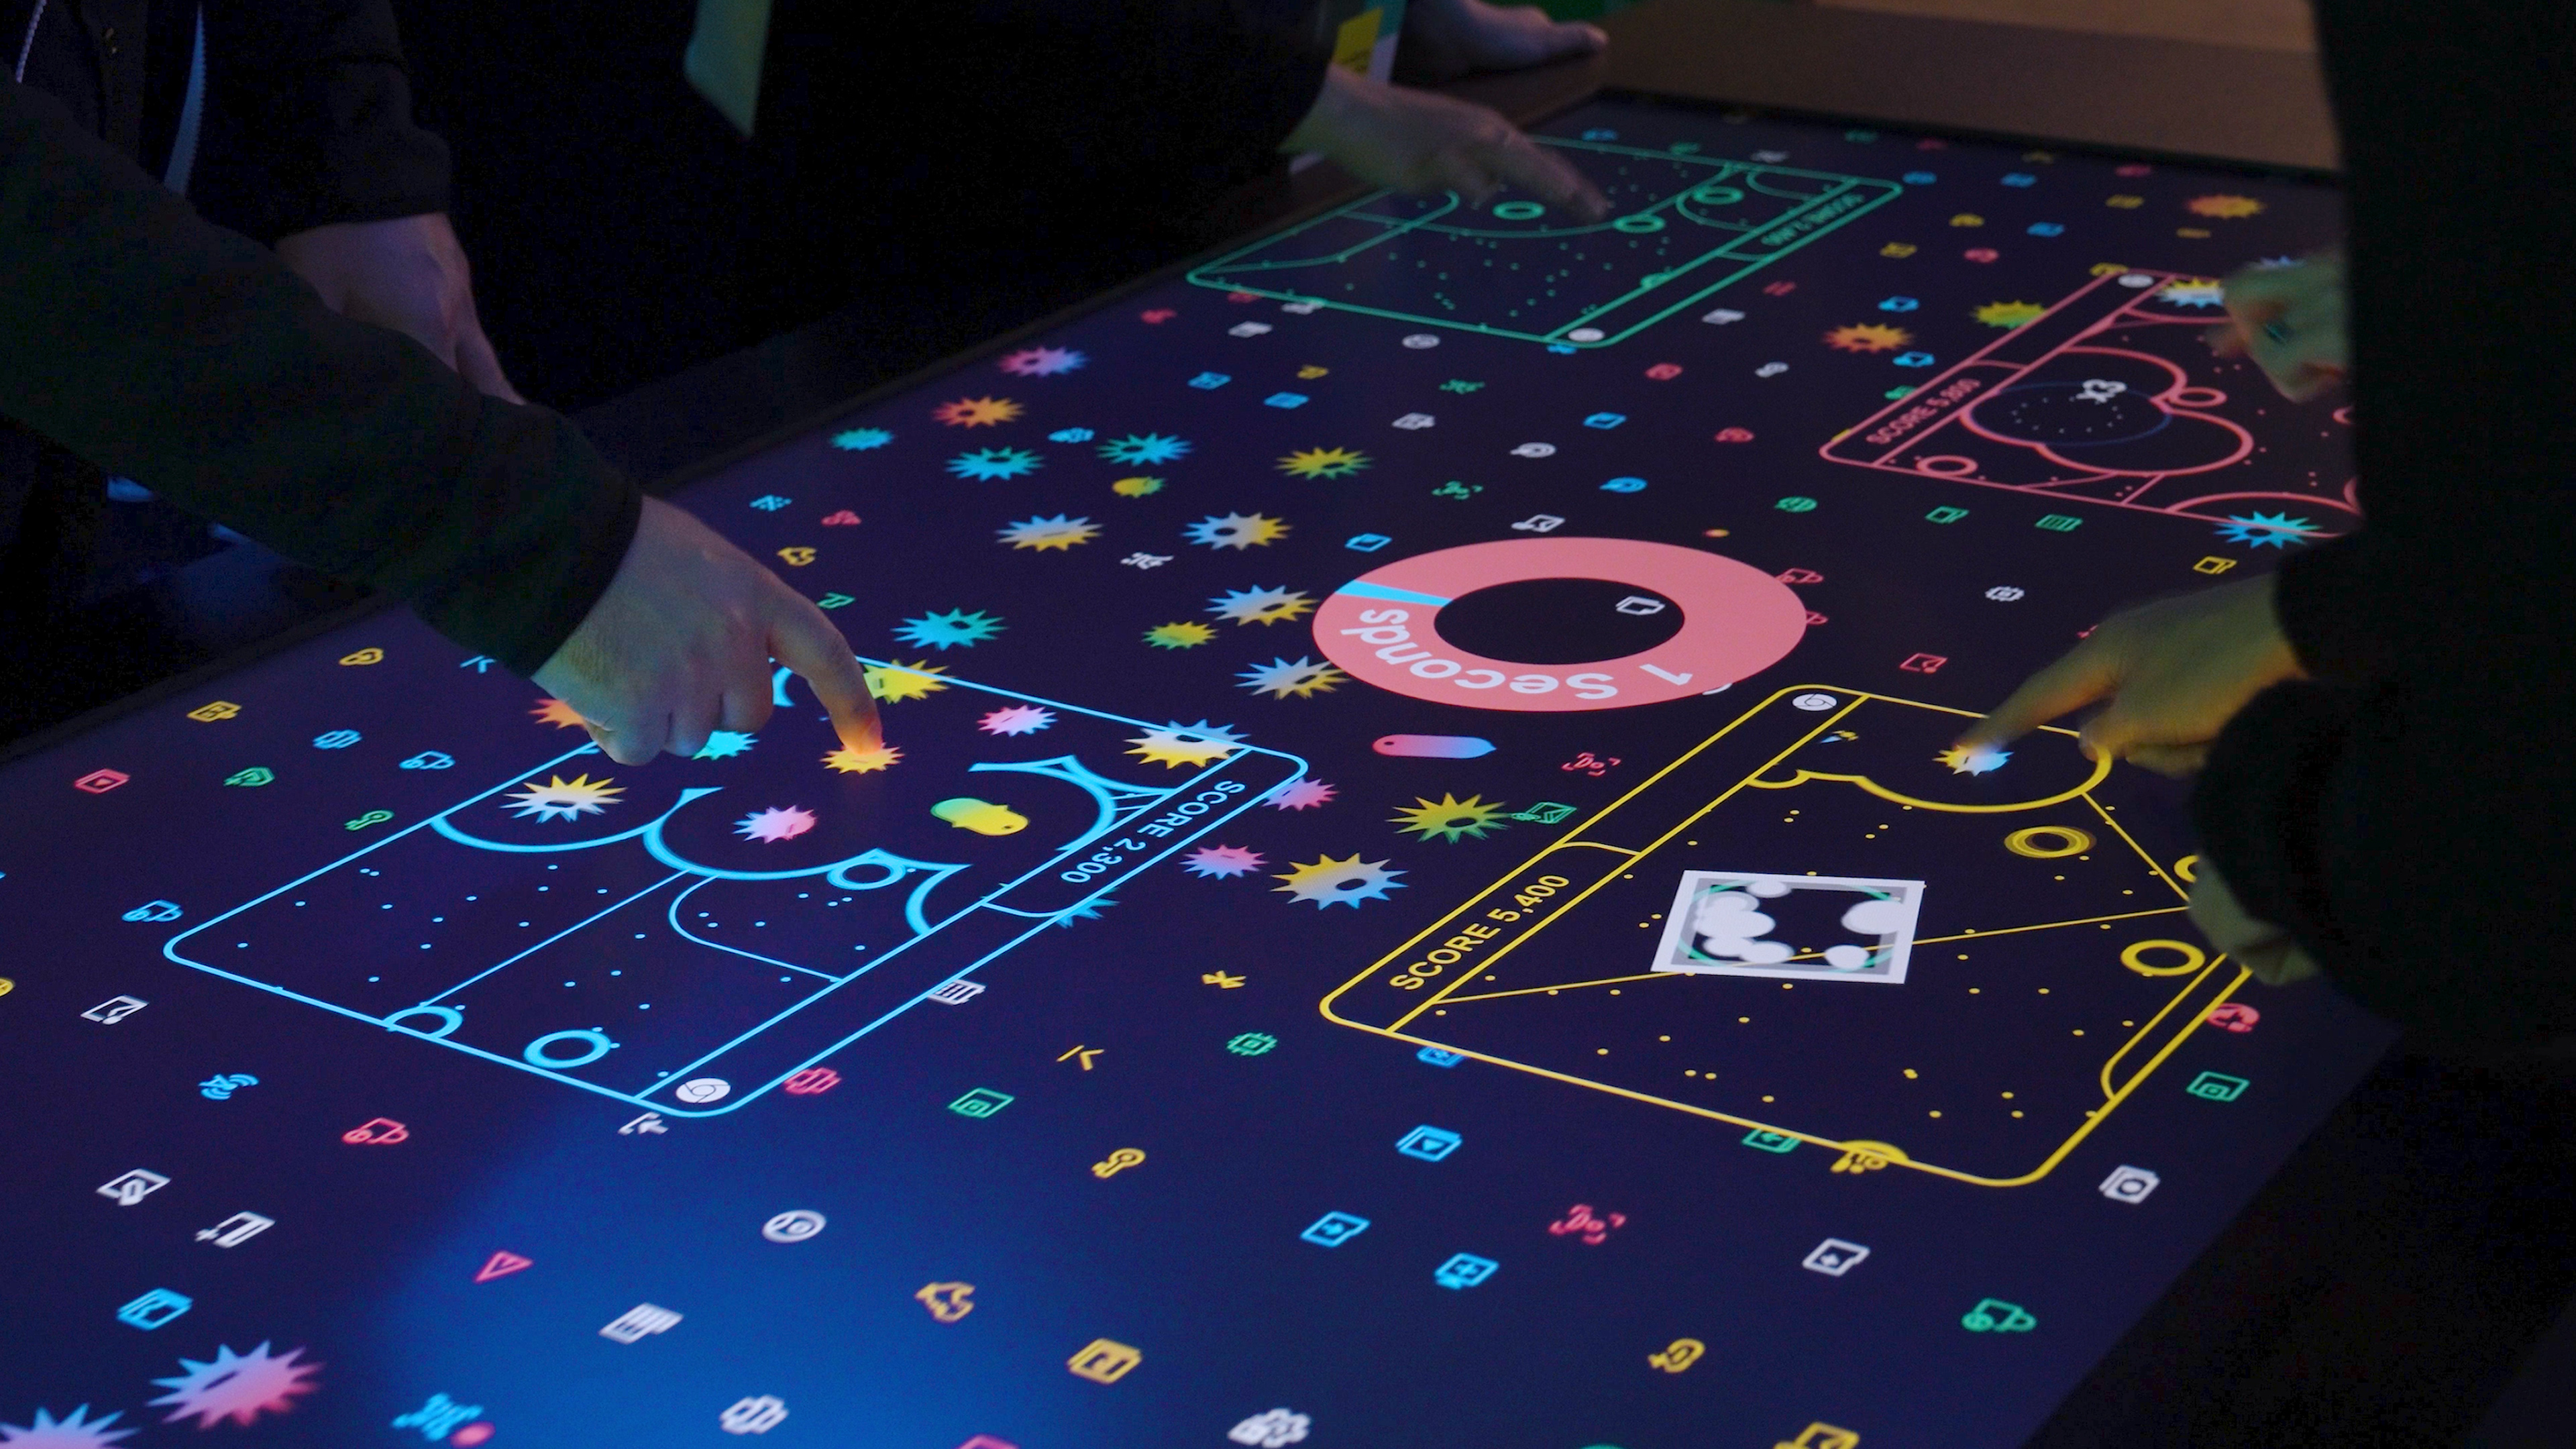 Close up of the touchscreen table display. The Data Defense game experience is in full swing. Four players move around their stylized chrome windows to find and neutralize threats and gain points. All display graphics are very colorful and vibrant.